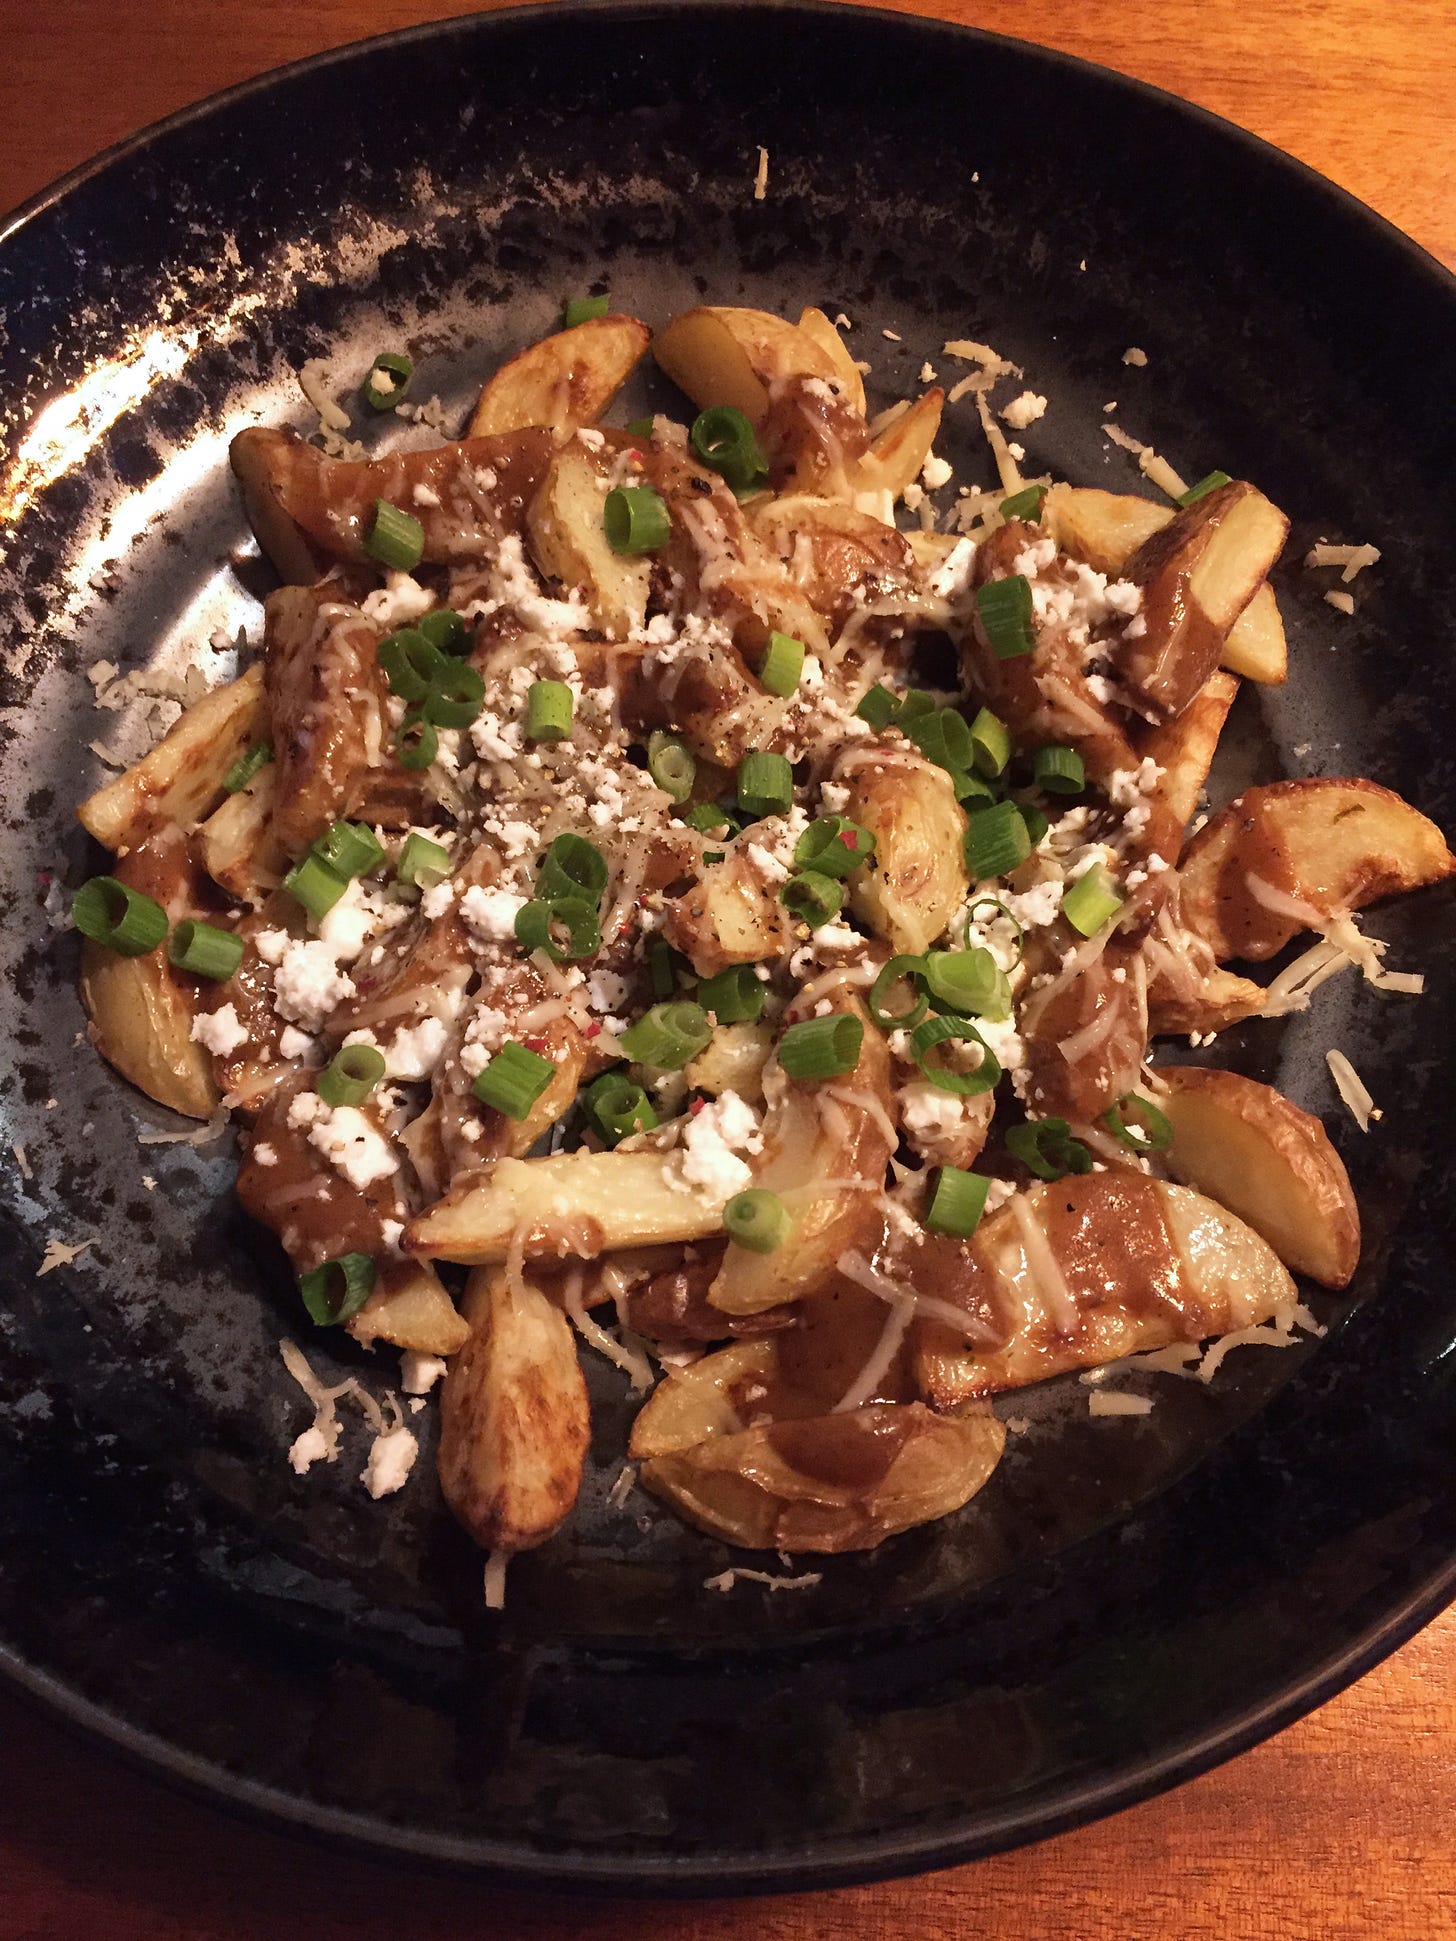 a black bowl filled with small wedge fries and covered in gravy, shredded mozzarella, and crumbles of feta, with chopped green onions.